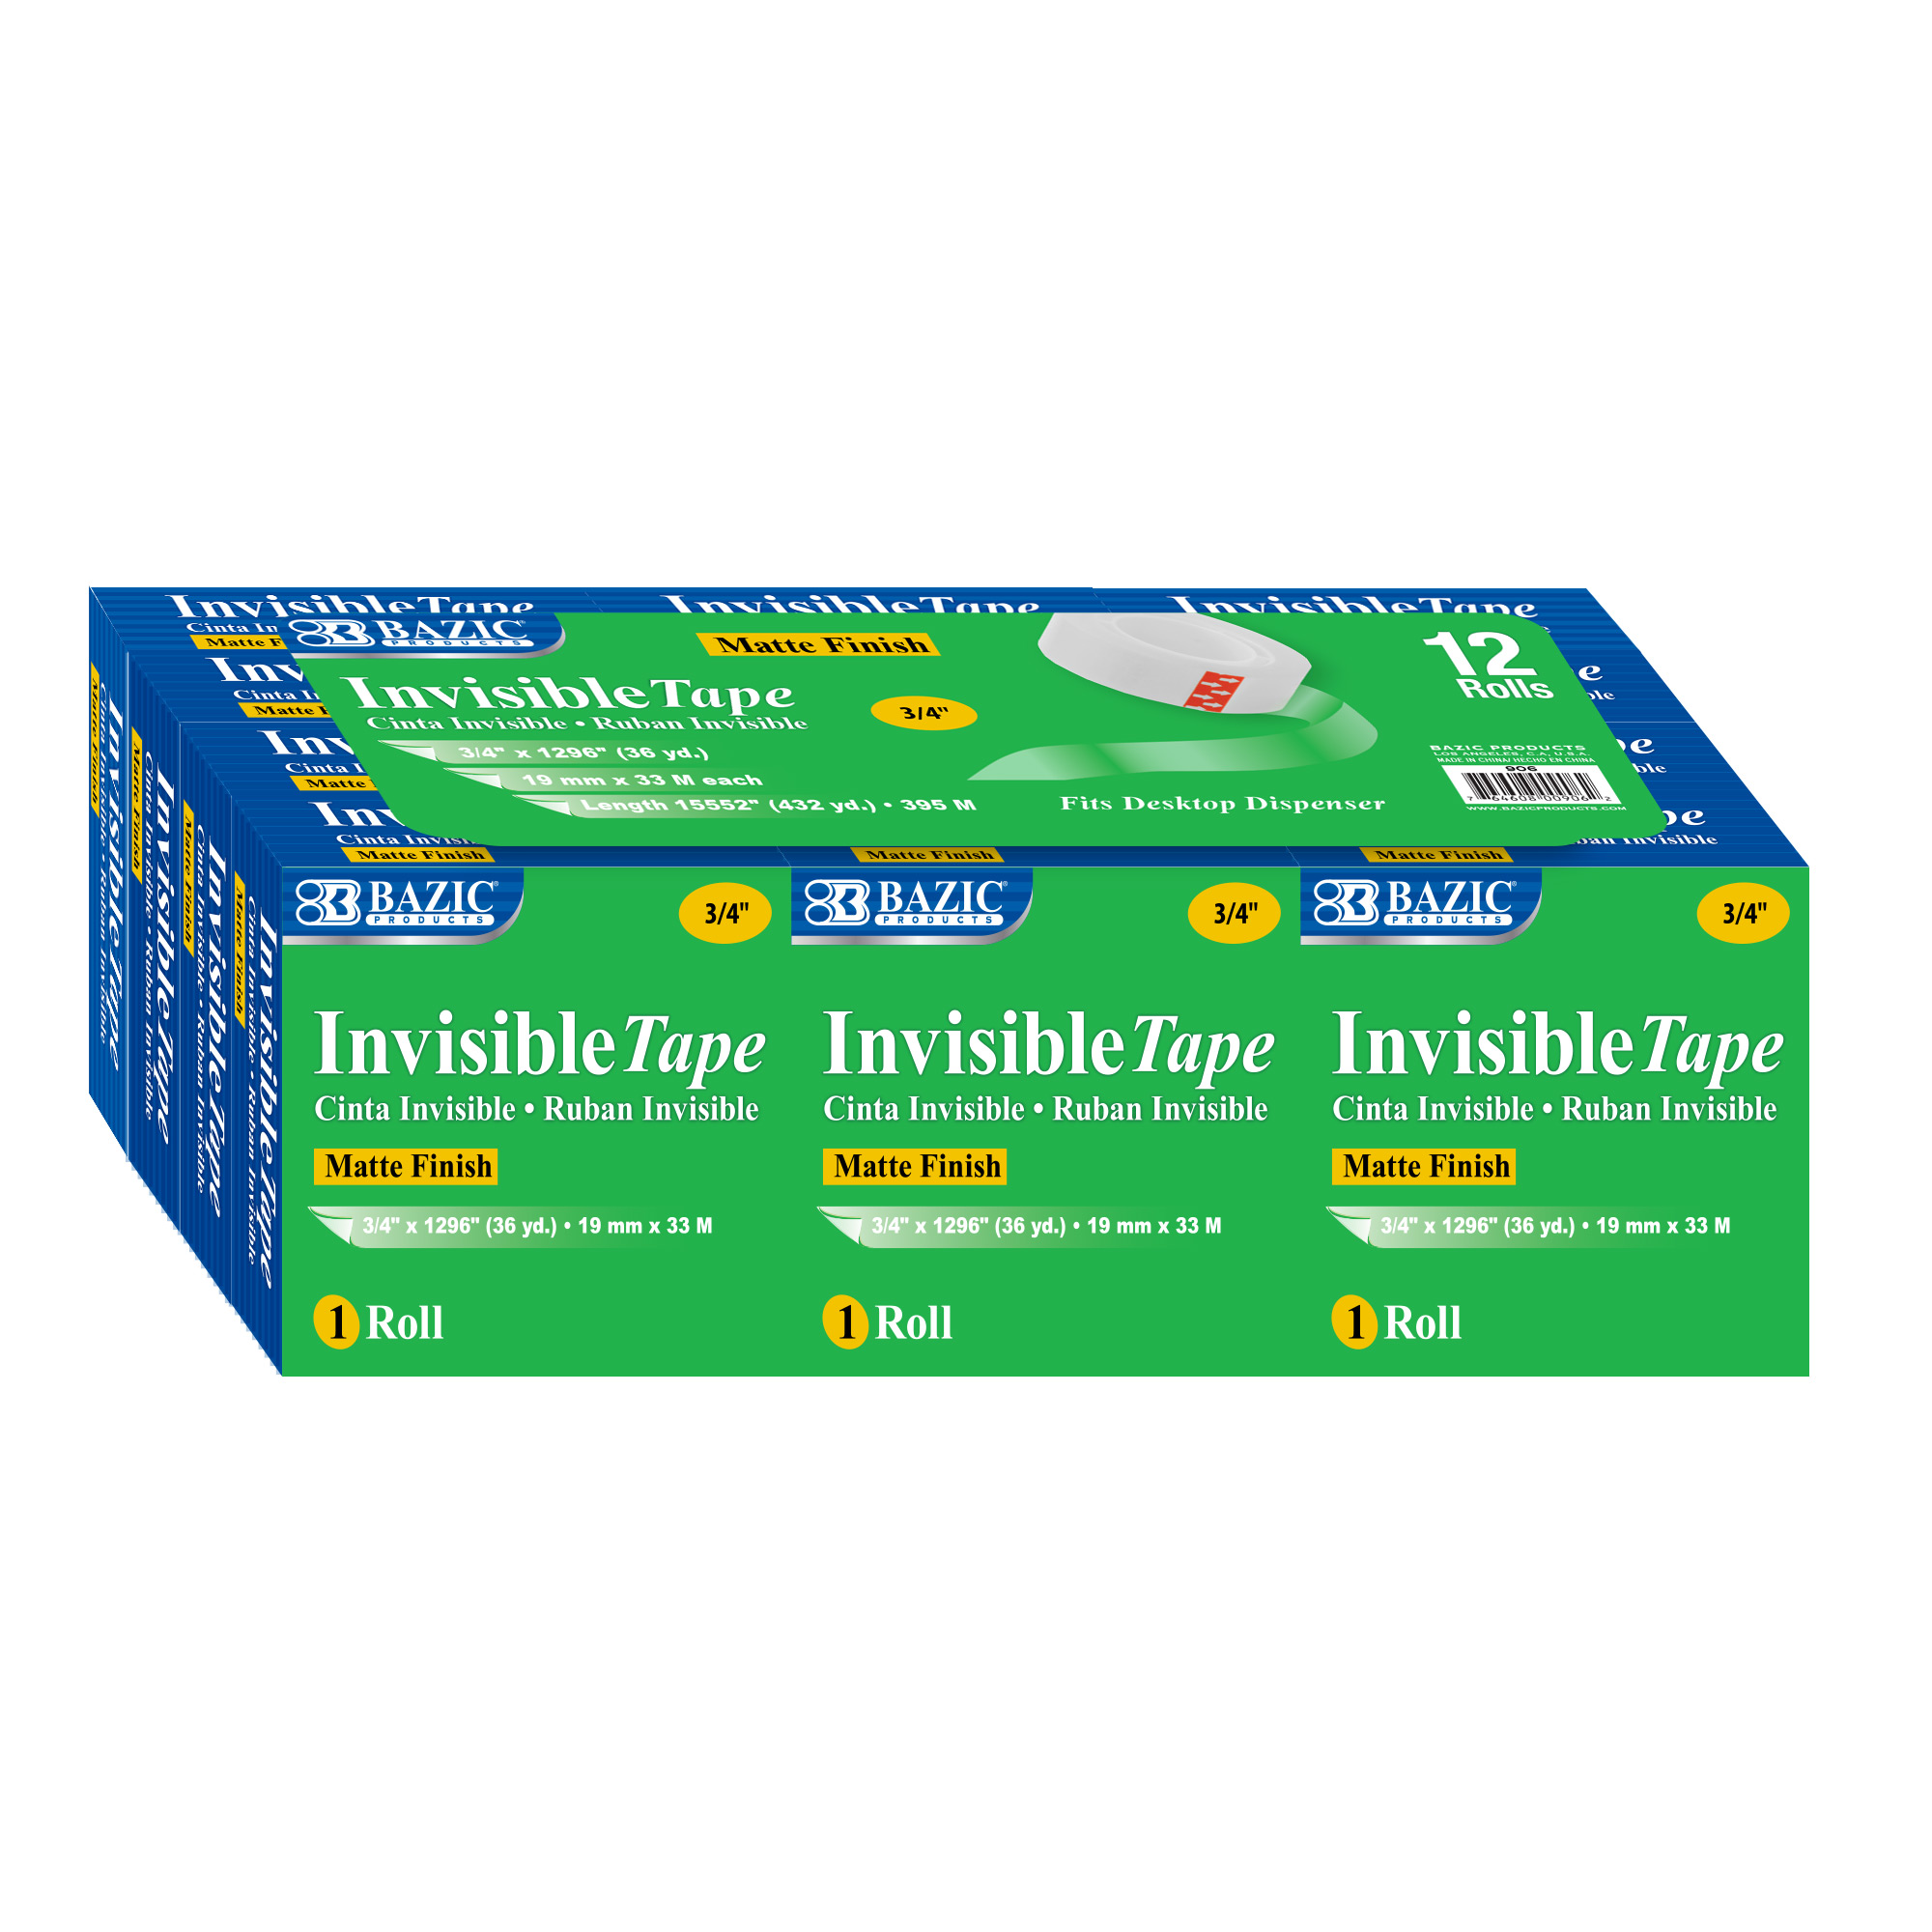 BAZIC 3/4 X 1296 Invisible Tape Refill (12/Pack) Bazic Products